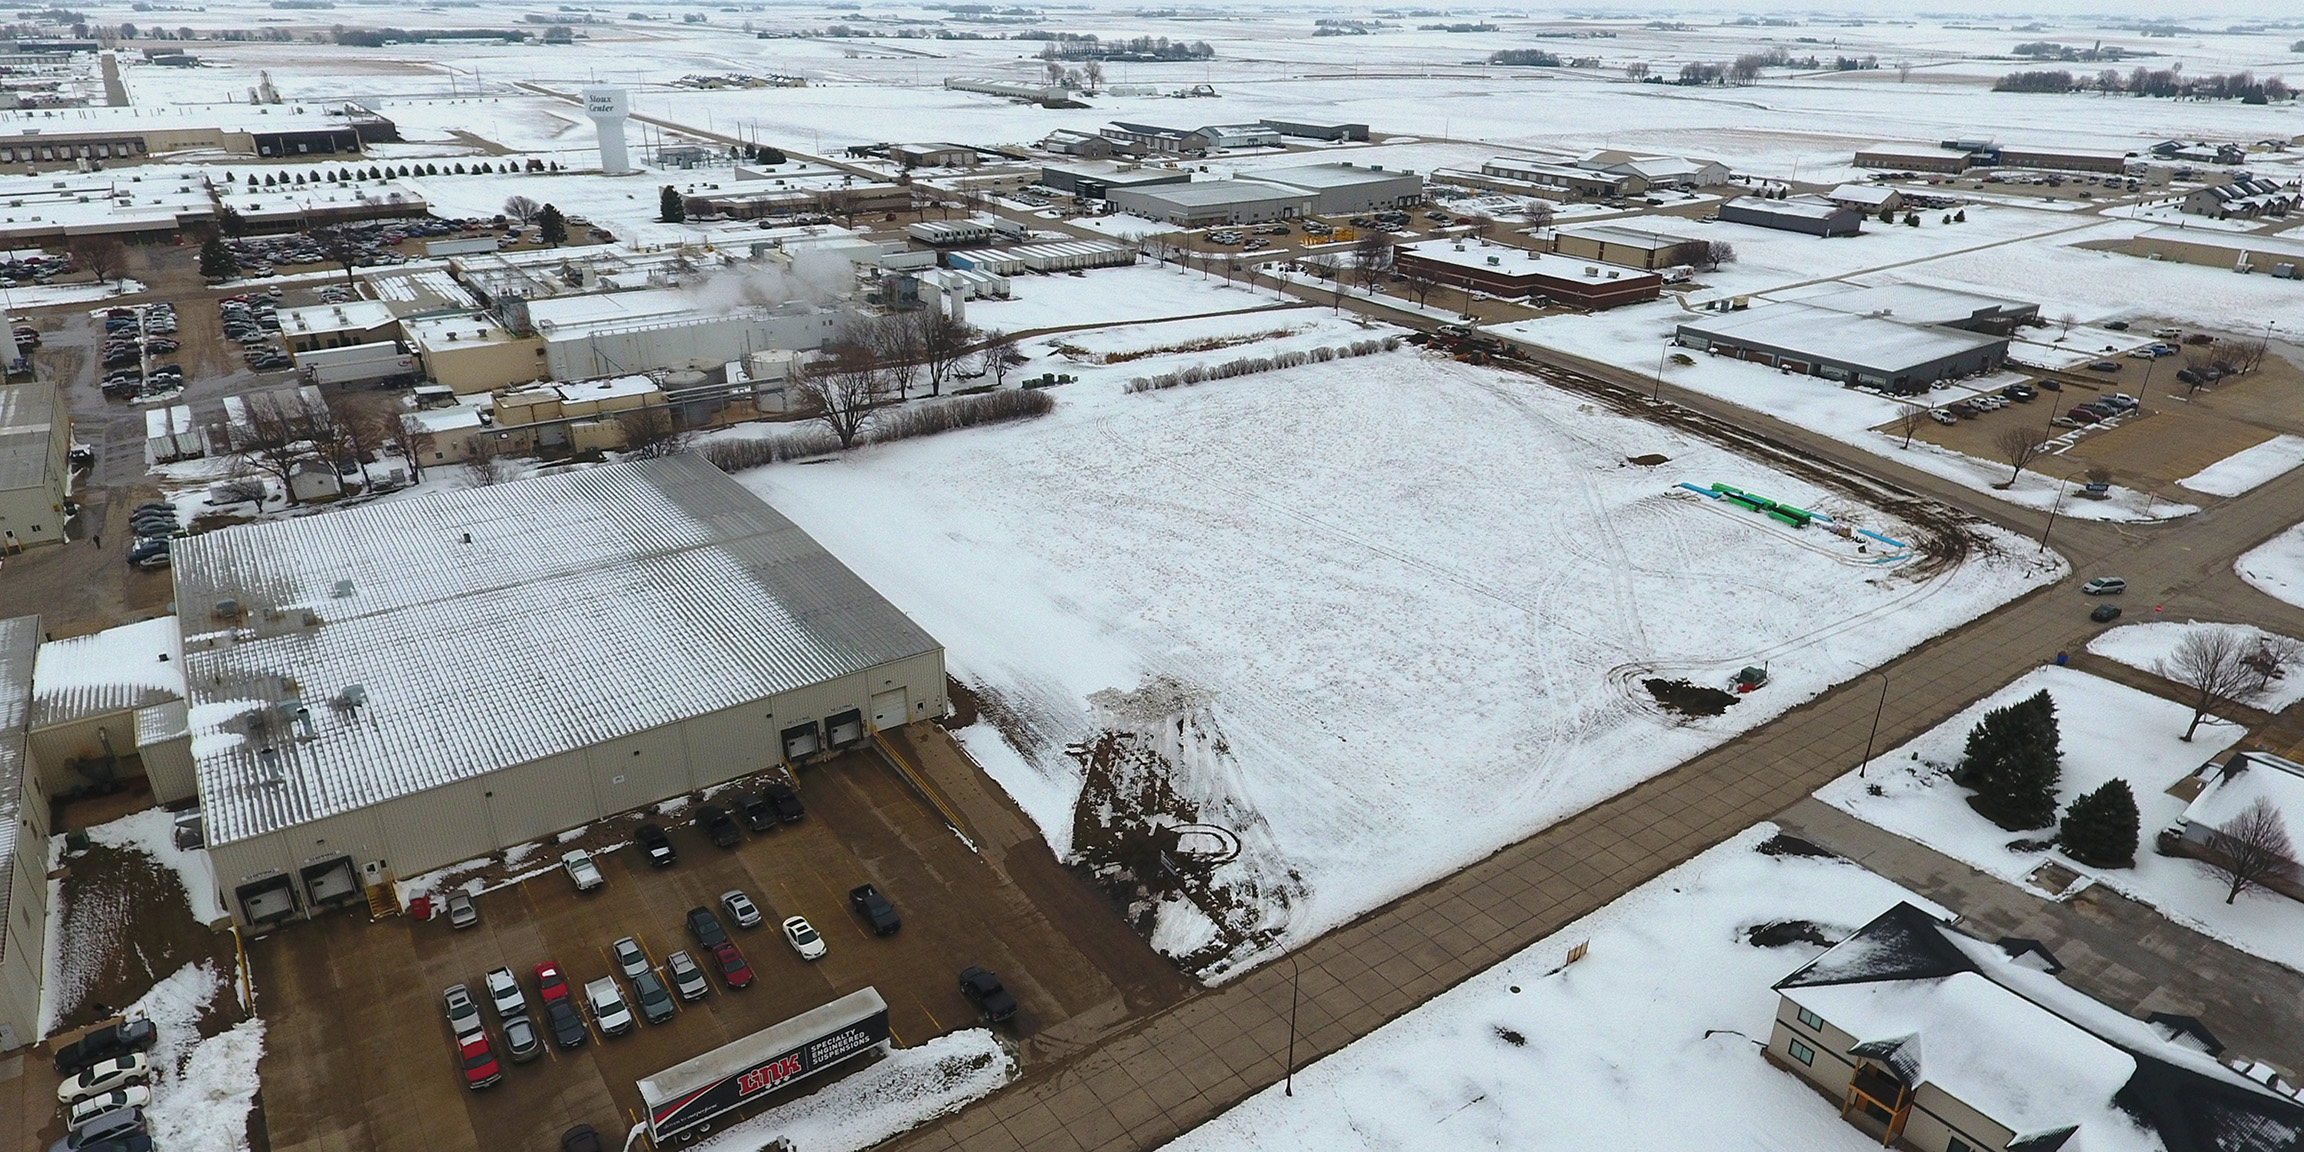 Link's new 50,000-square-foot manufacturing and training facility will be located on Link’s Sioux Center campus, adjacent to and connected with its existing plant 3 building.